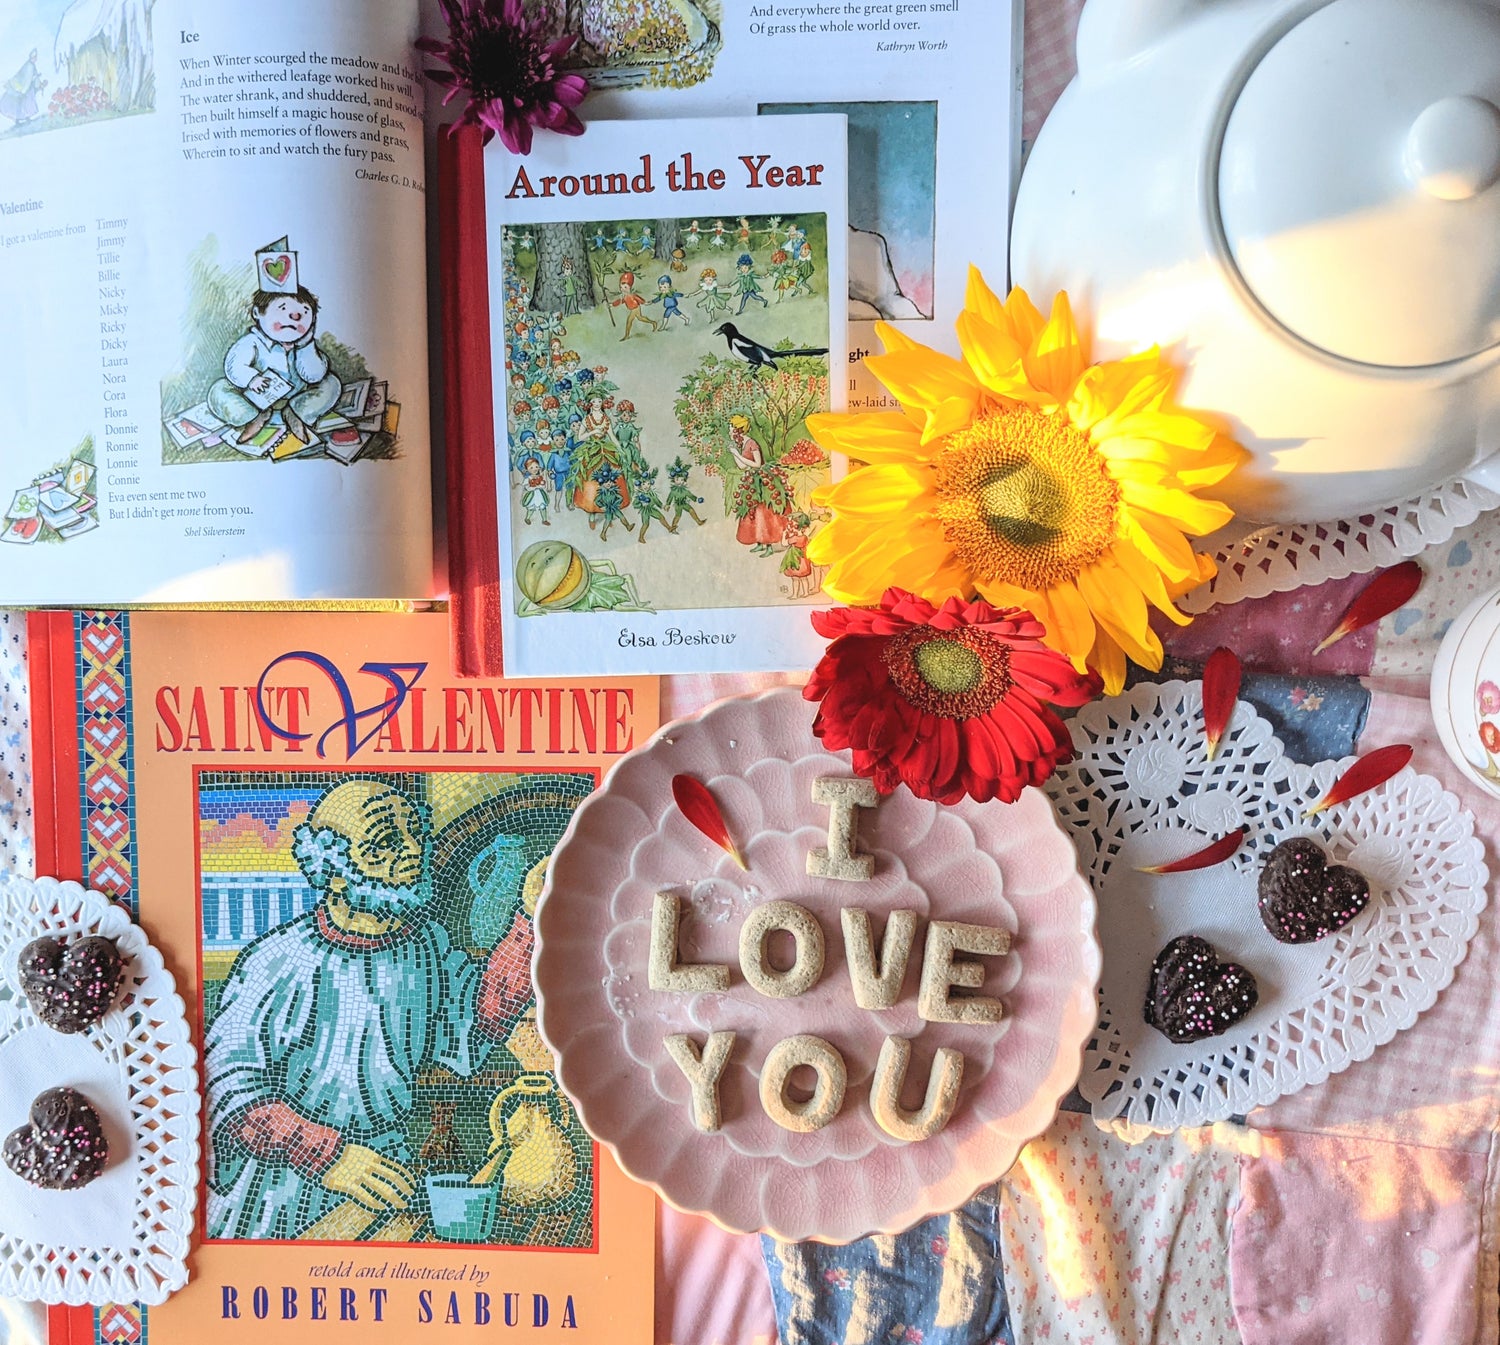 Simple Ideas for a Valentine Tea Time (including recipes, books, + handcrafts)